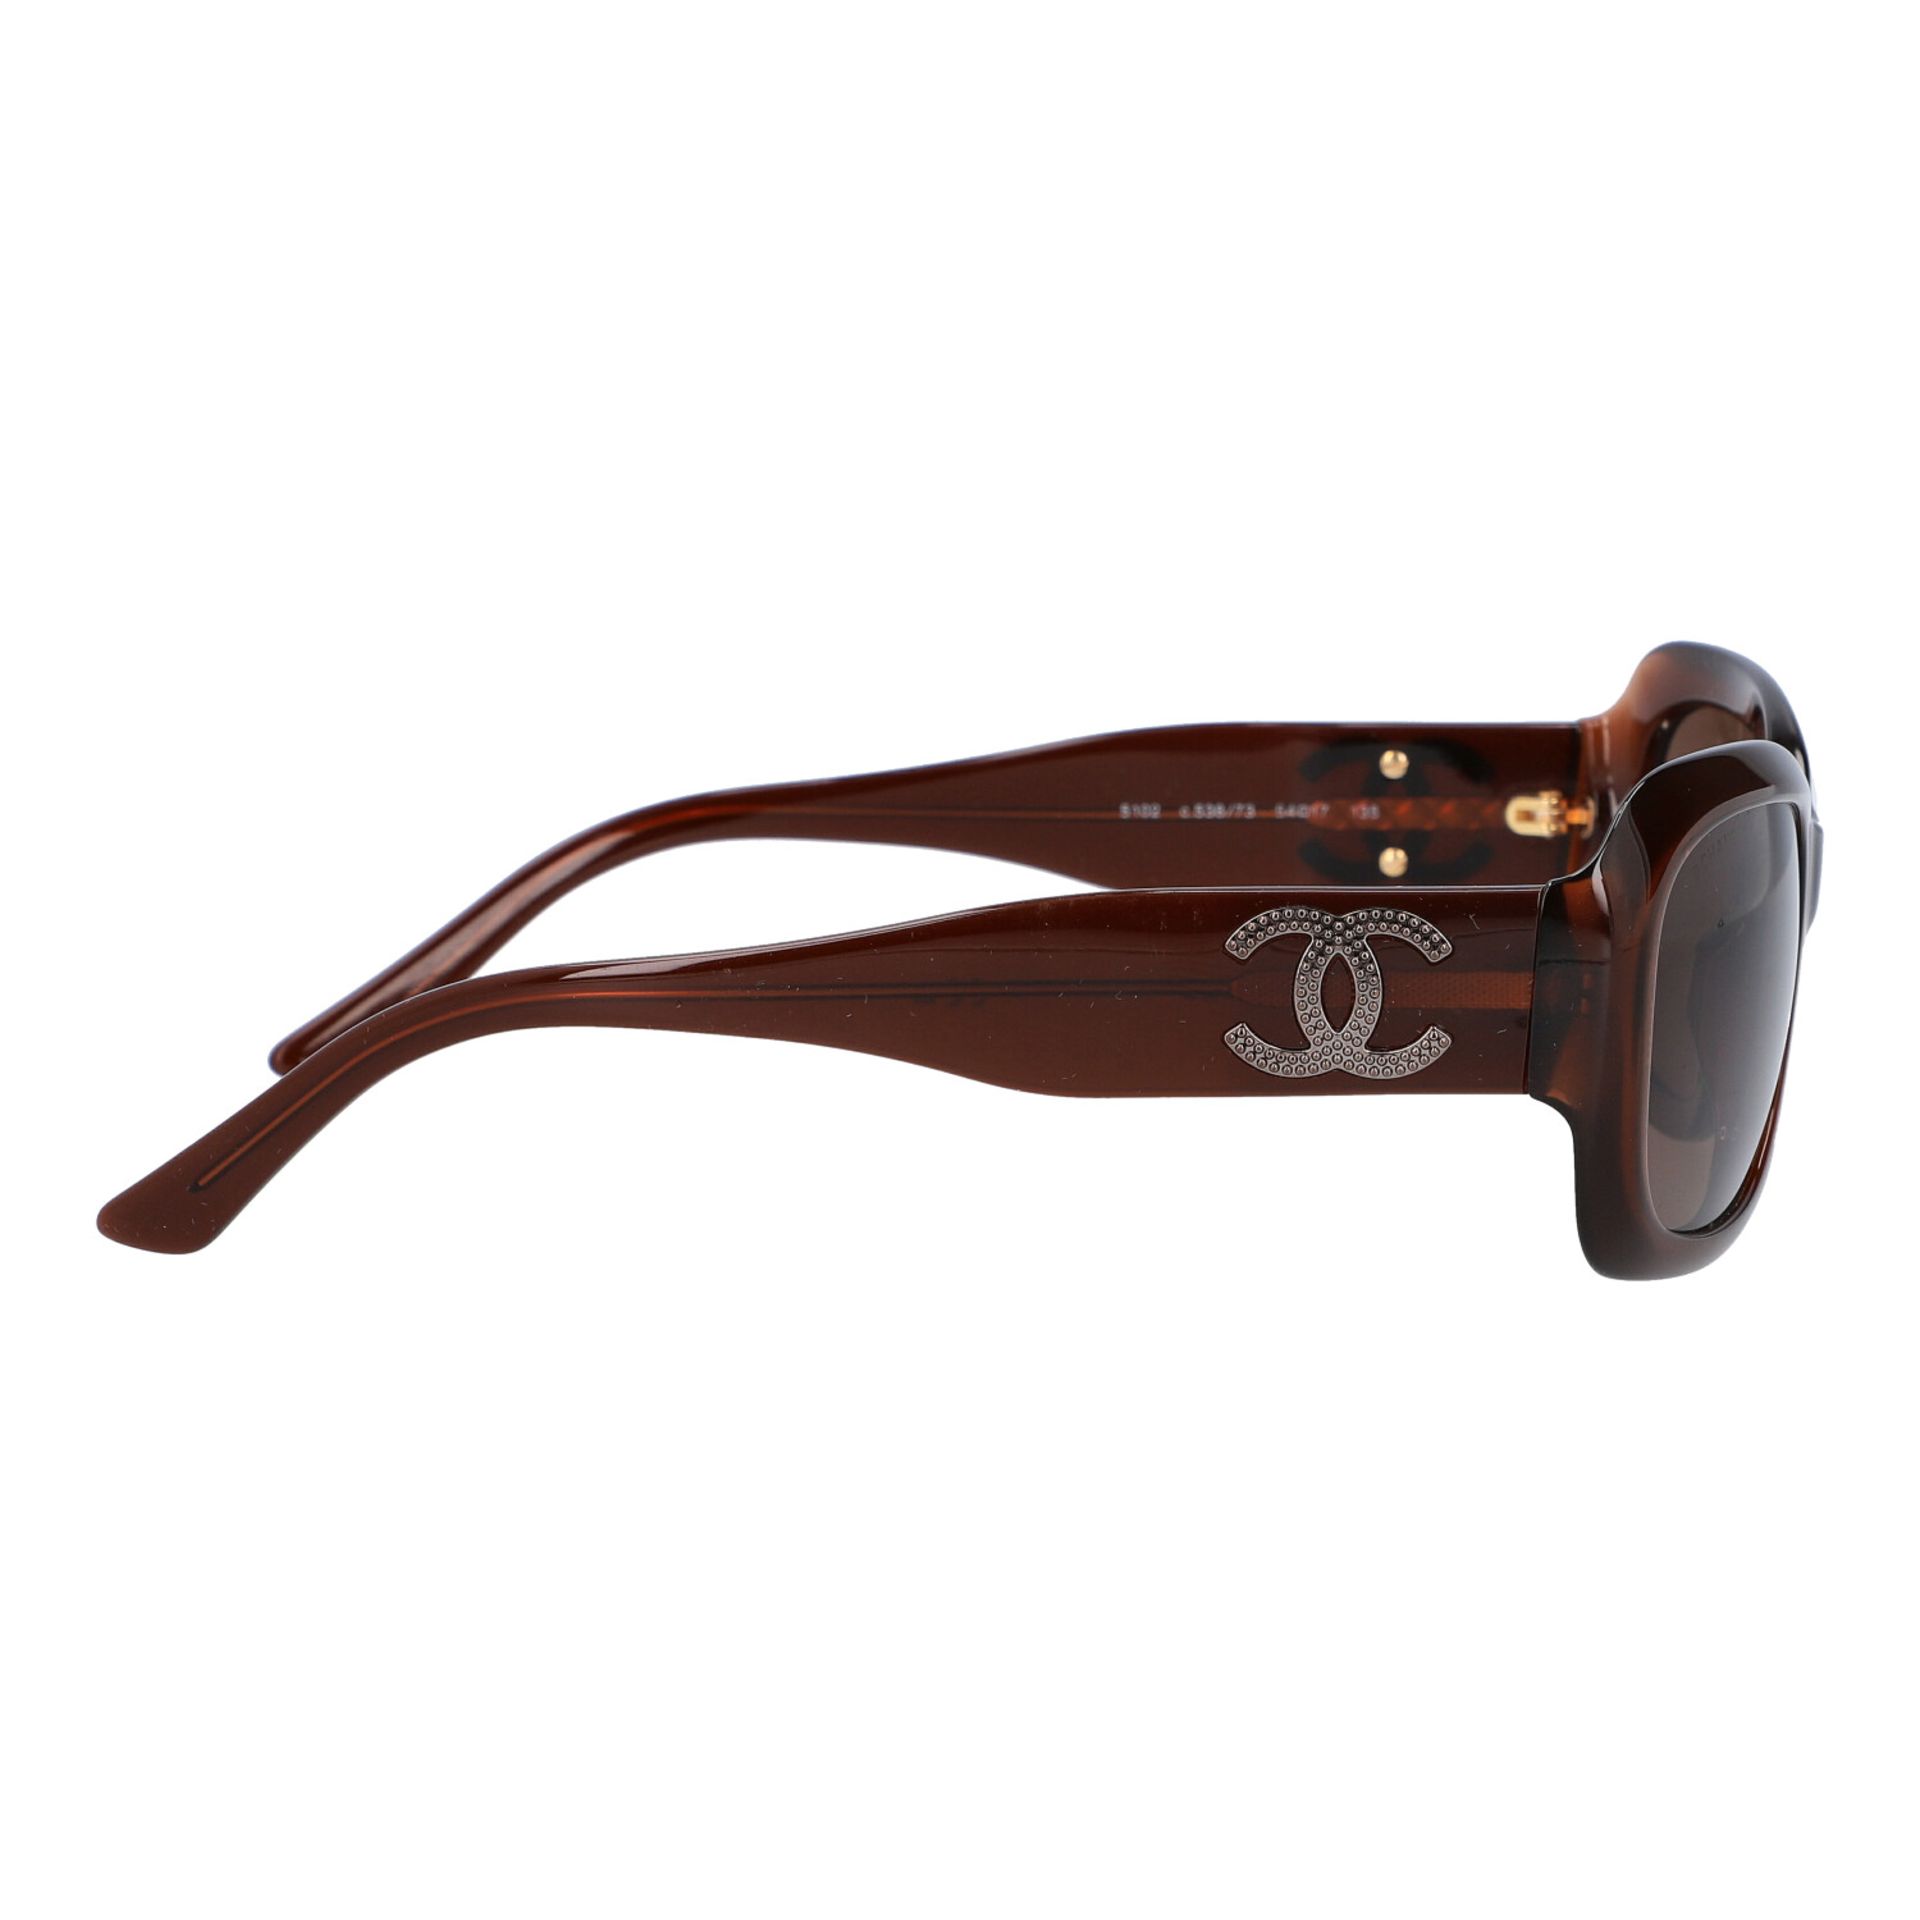 CHANEL Sonnenbrille "c.538/73". - Image 3 of 4